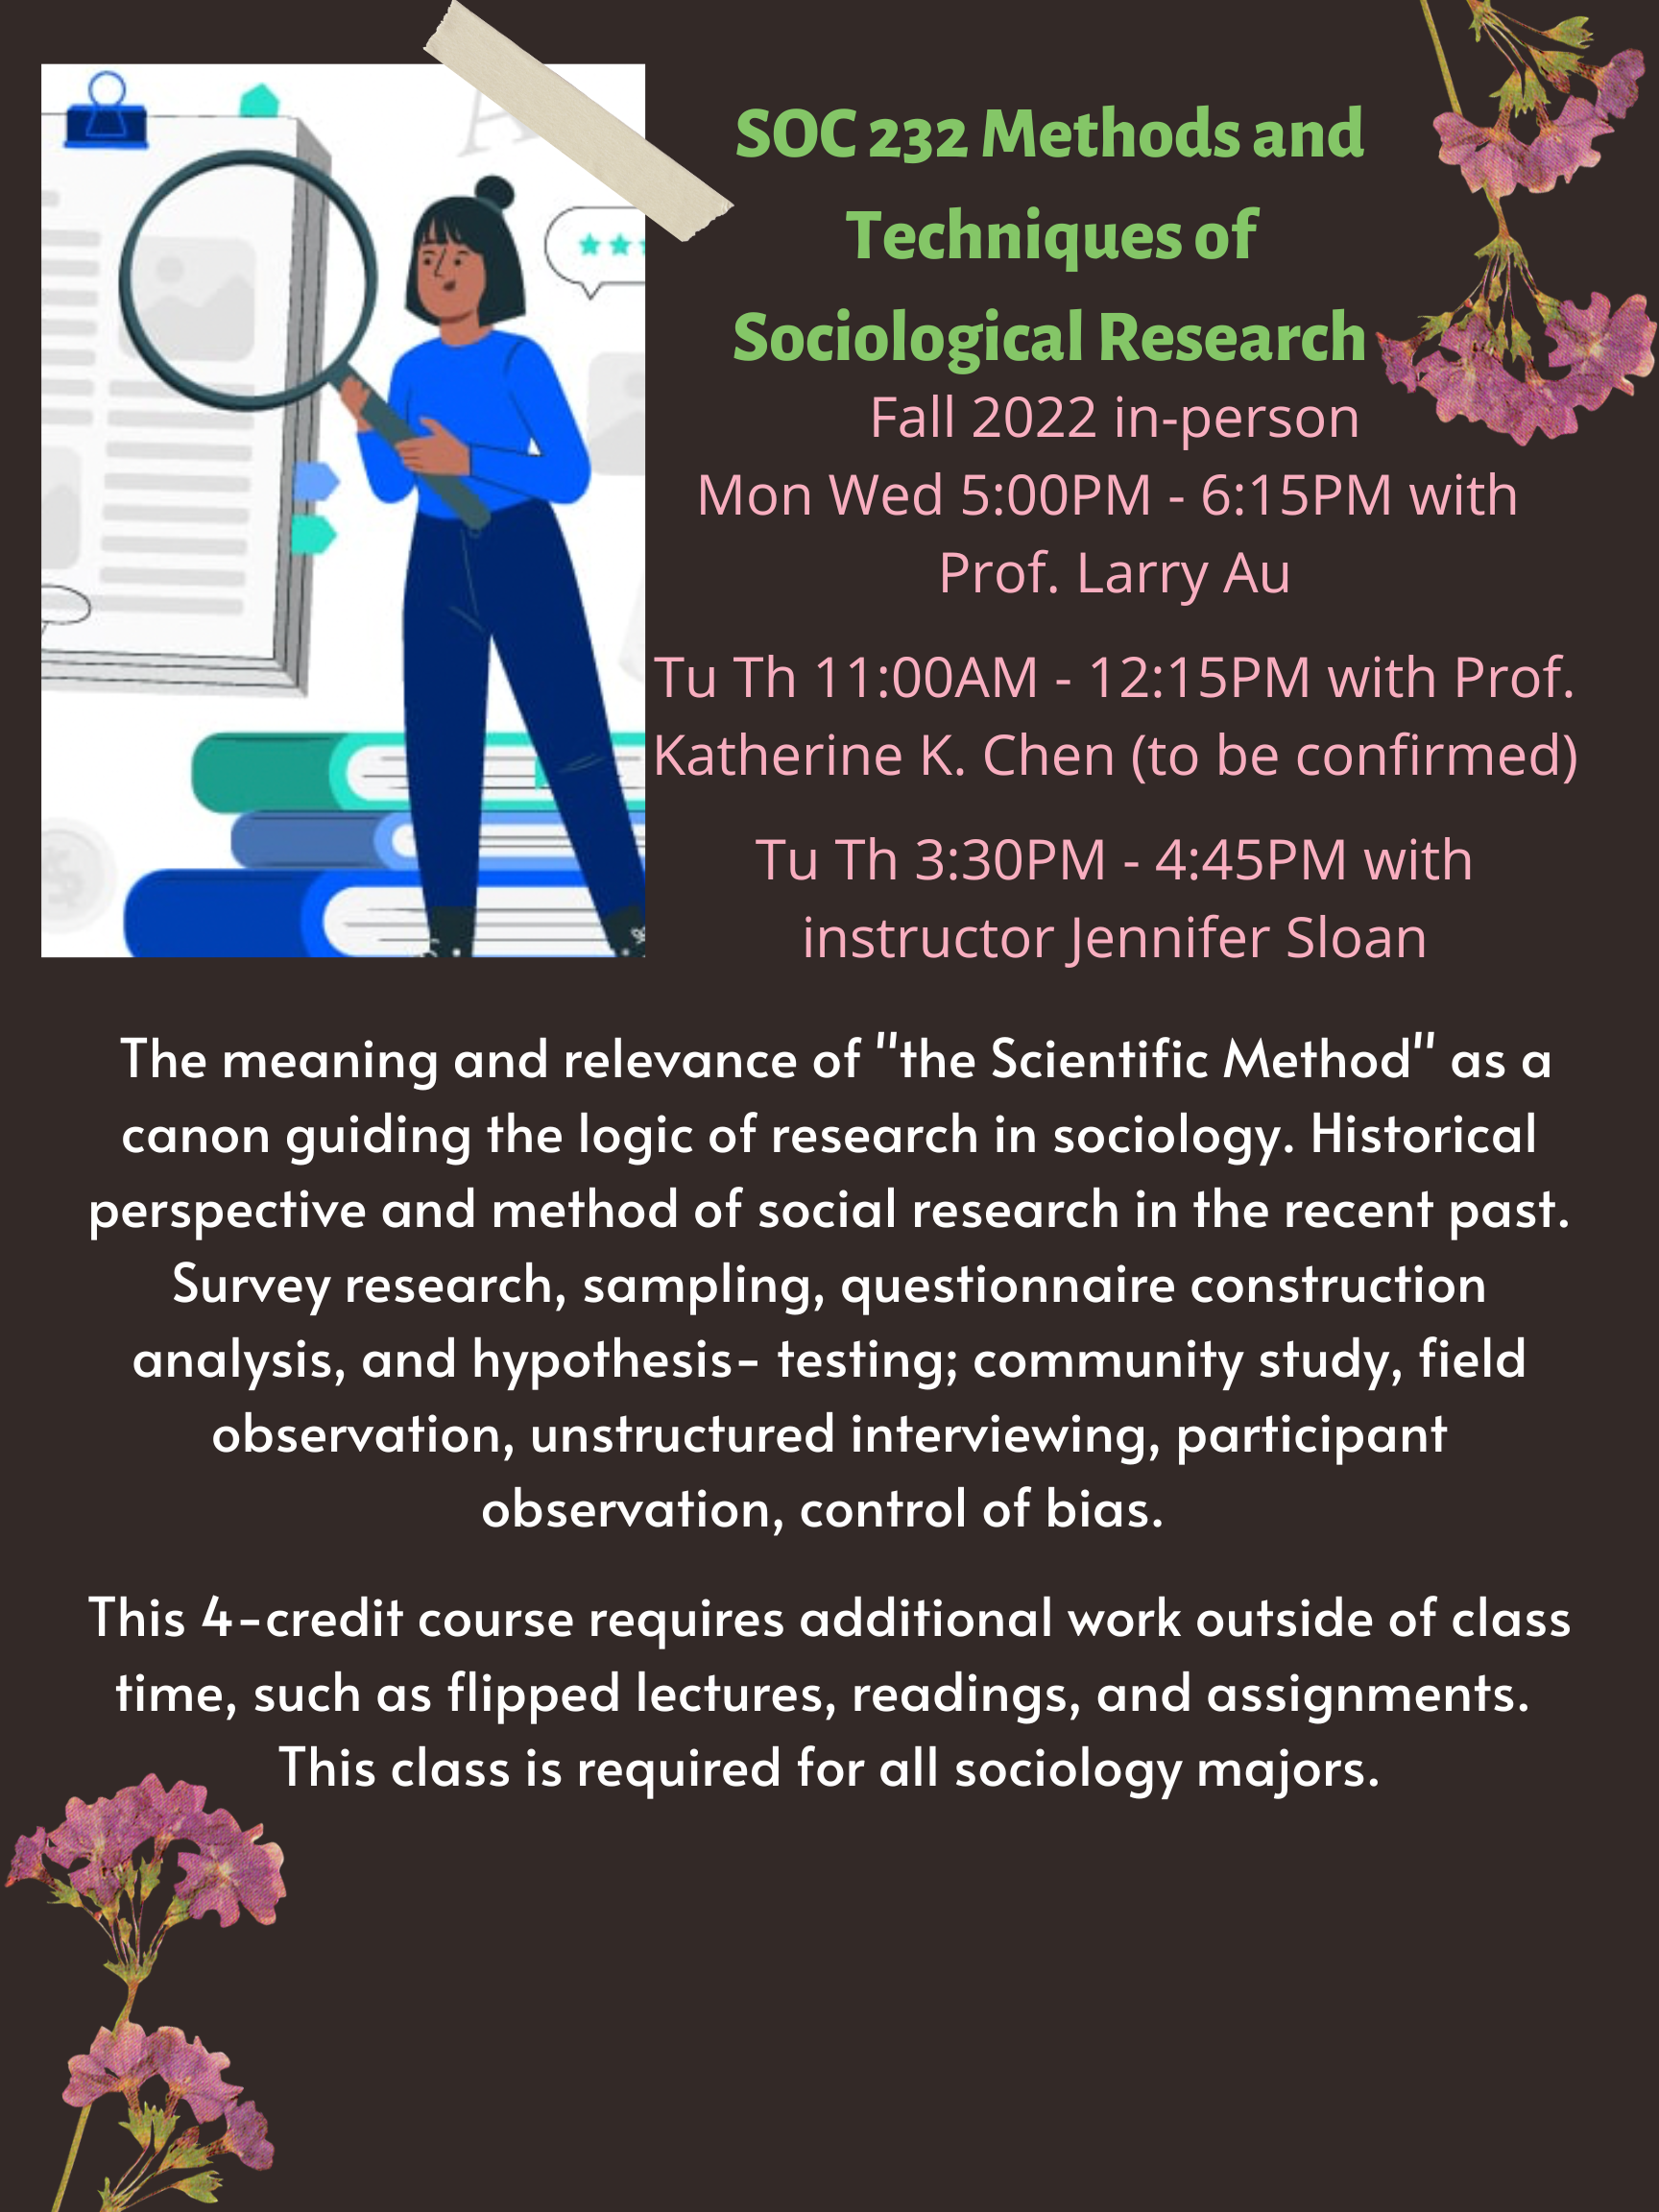 Methods and Techniques of Sociological Research Course Description